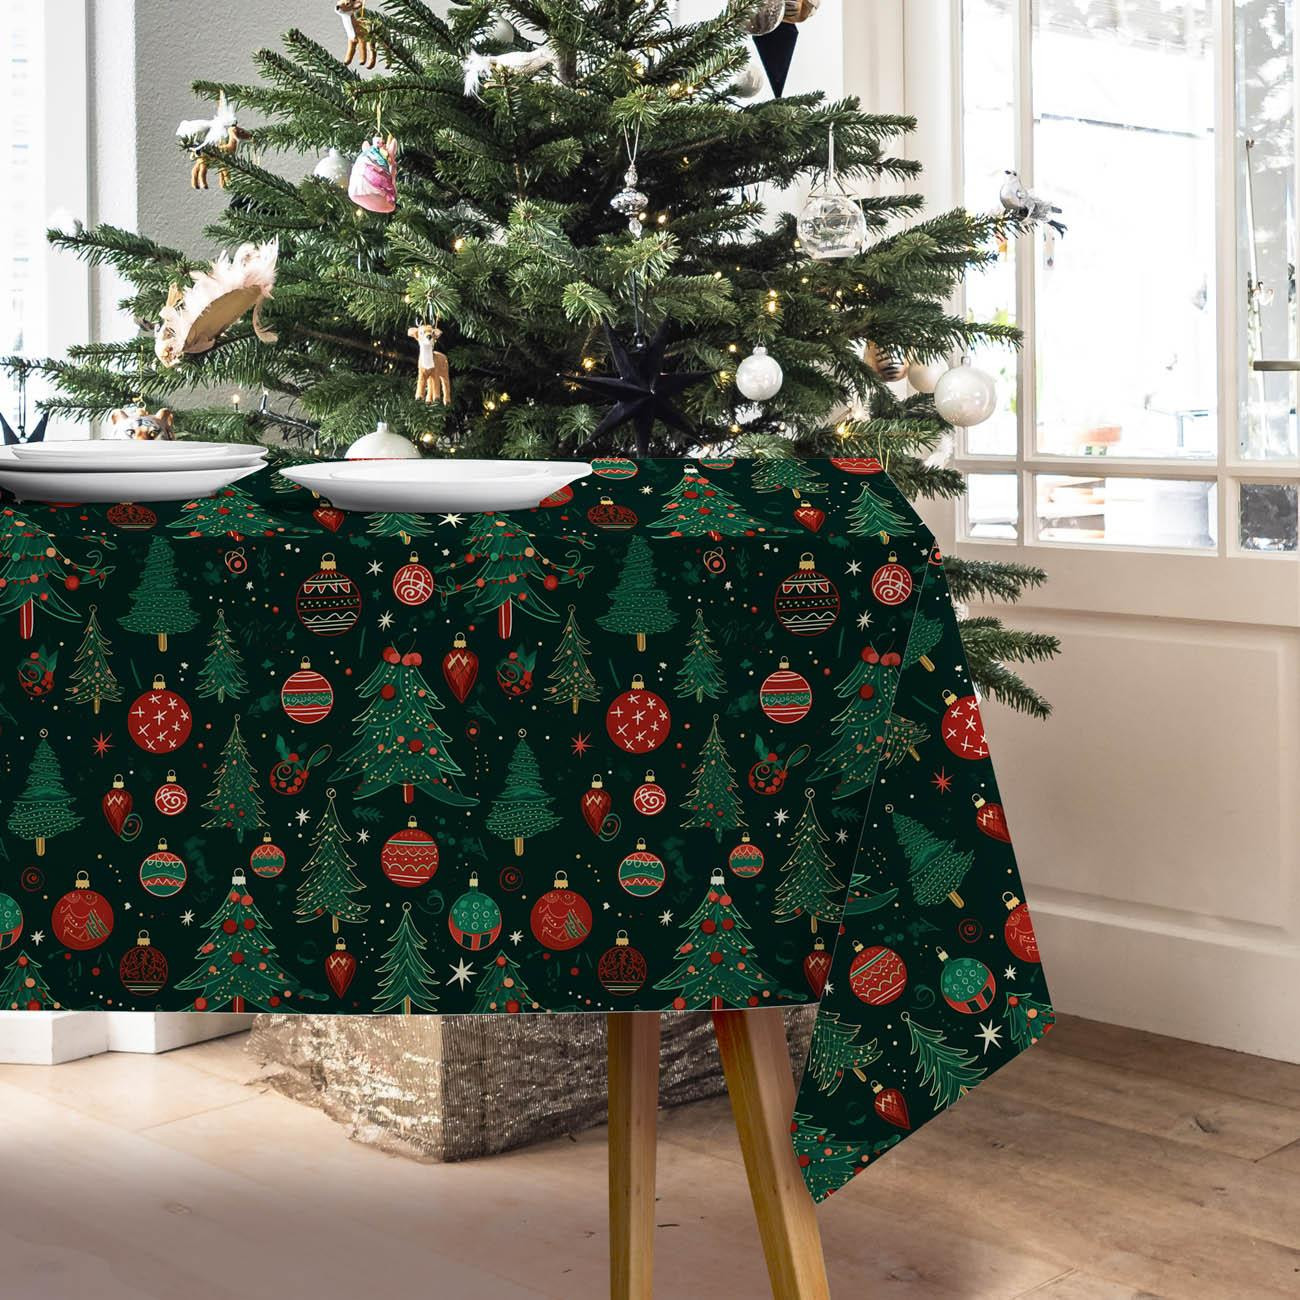 CHRISTMAS TREE PAT. 3 - Woven Fabric for tablecloths